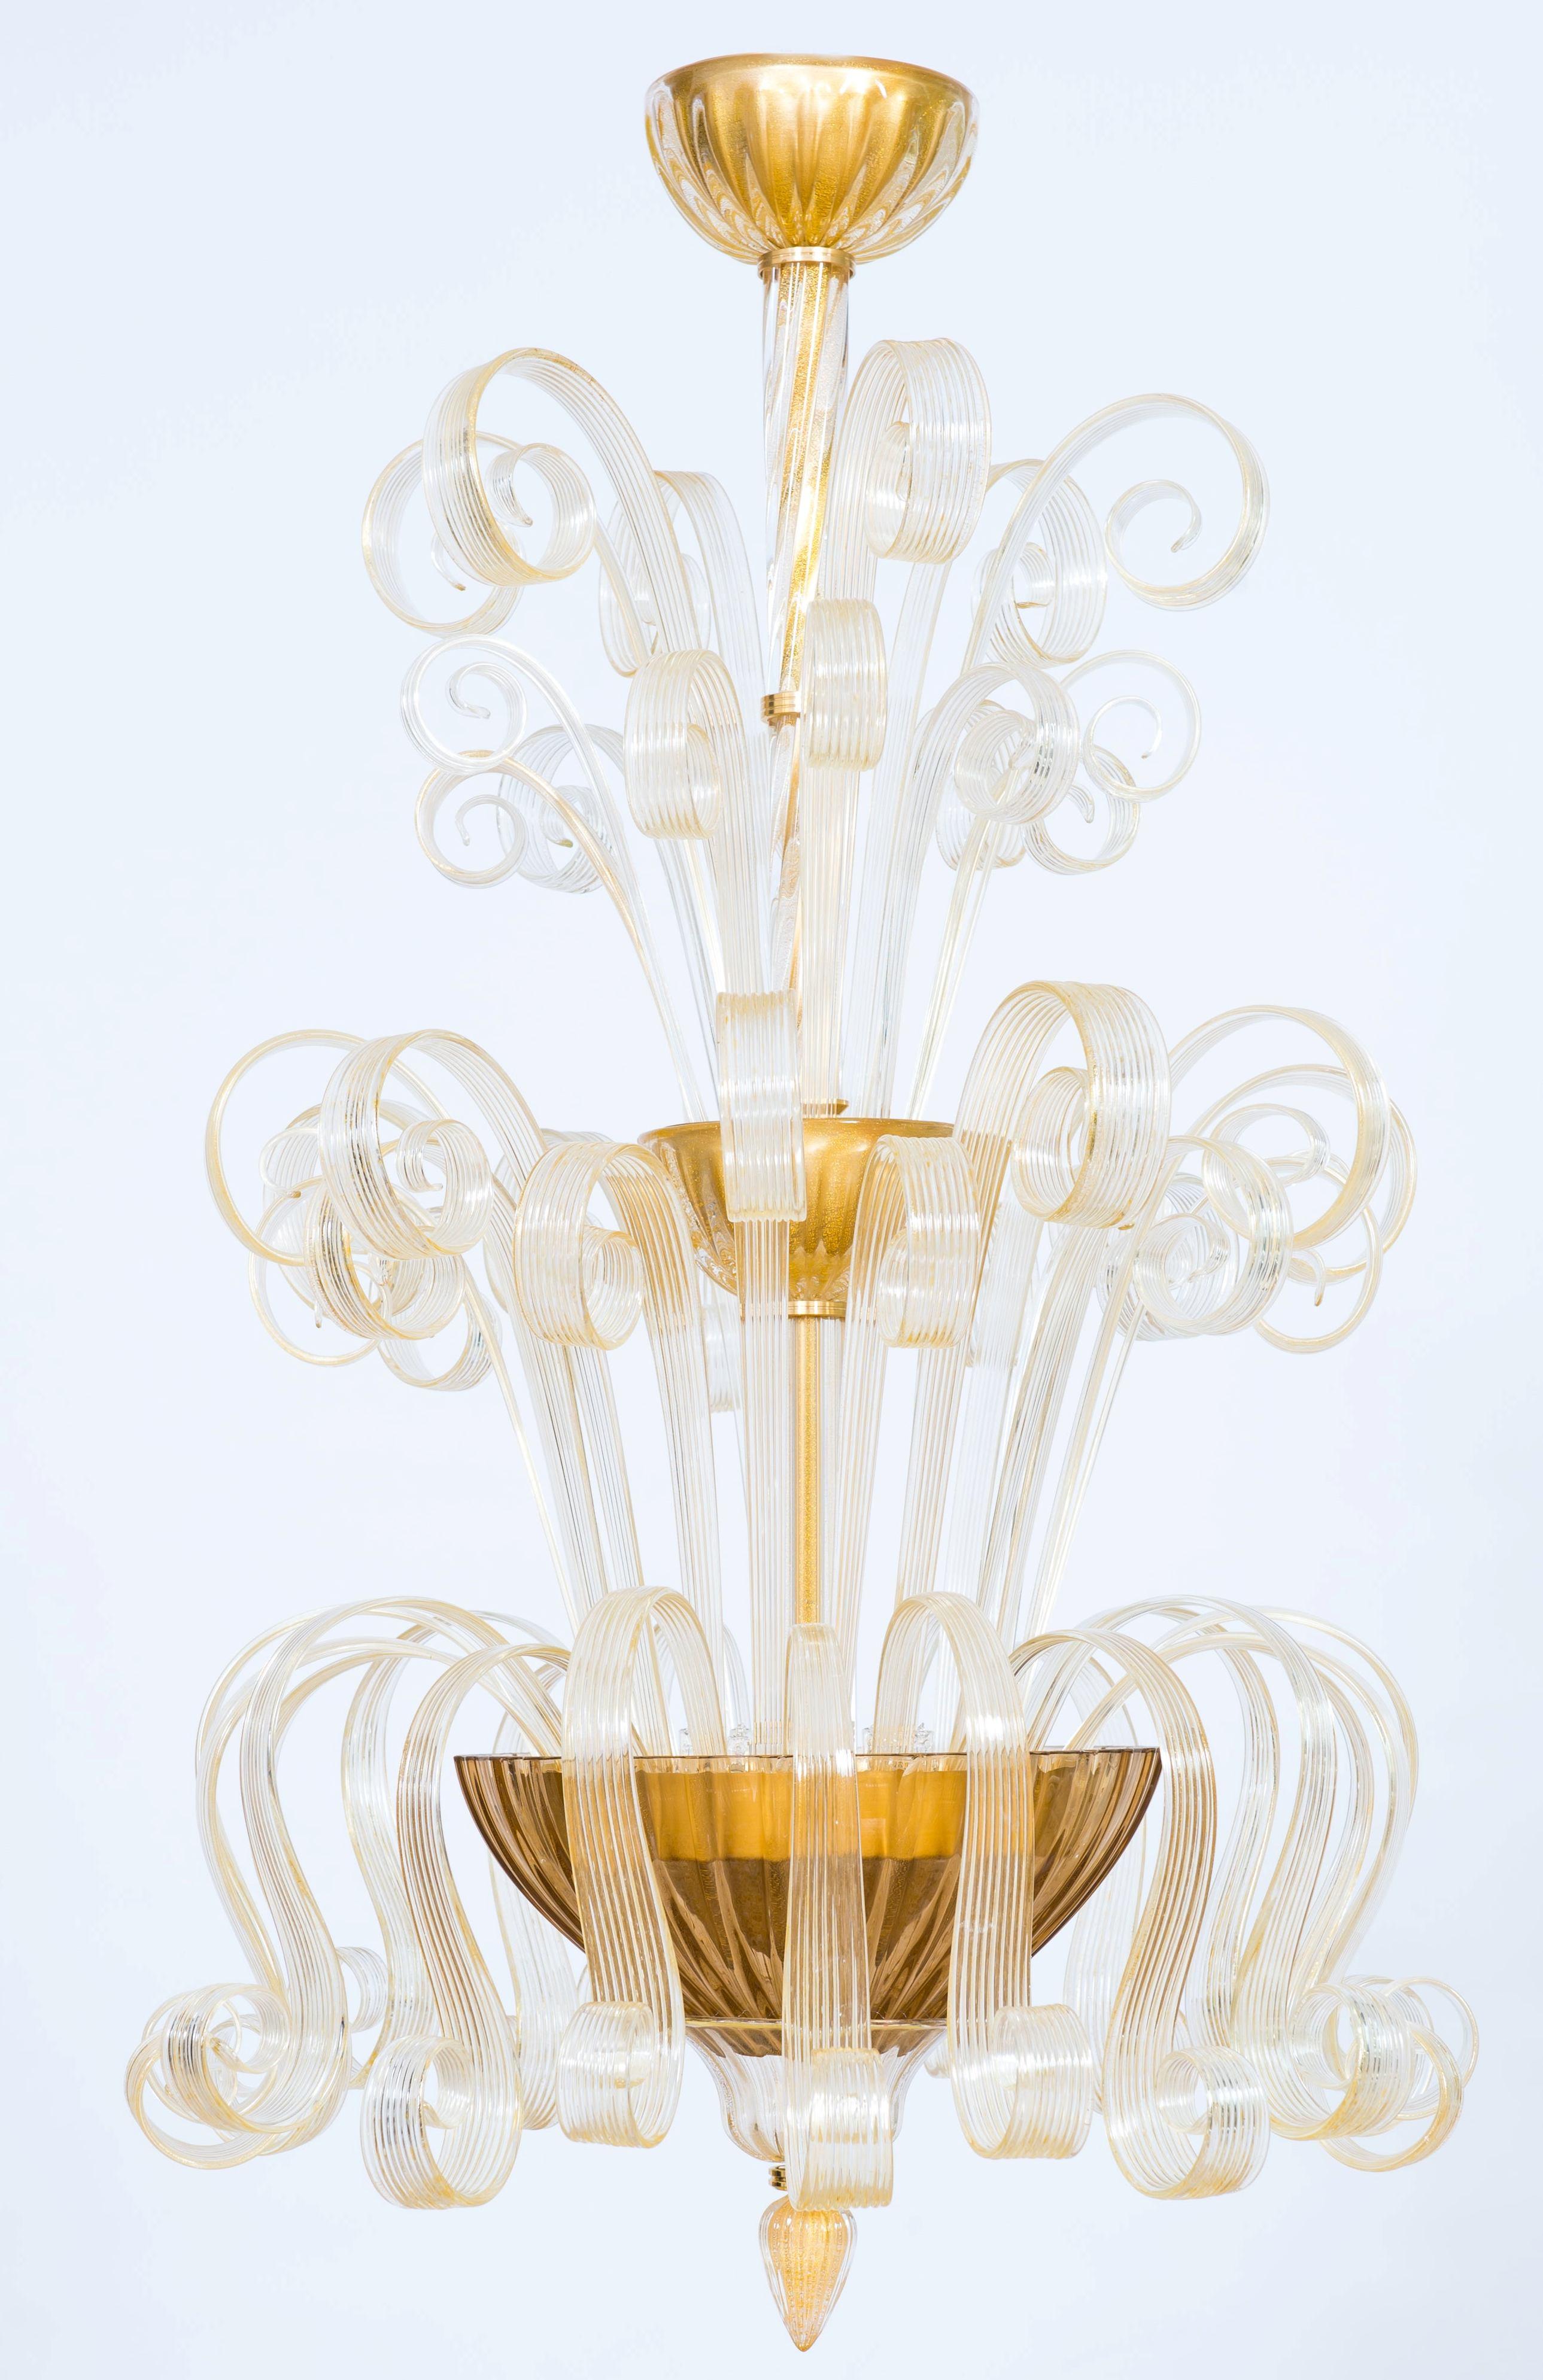 Contemporary Murano Glass Flush Mount 24-Karat Gold Giovanni Dalla Fina, Italy
This astonishing artpiece is the result of the best Murano glass blowing tradition and finest modern trends designed and manufactured by Giovanni Dalla Fina. This flush